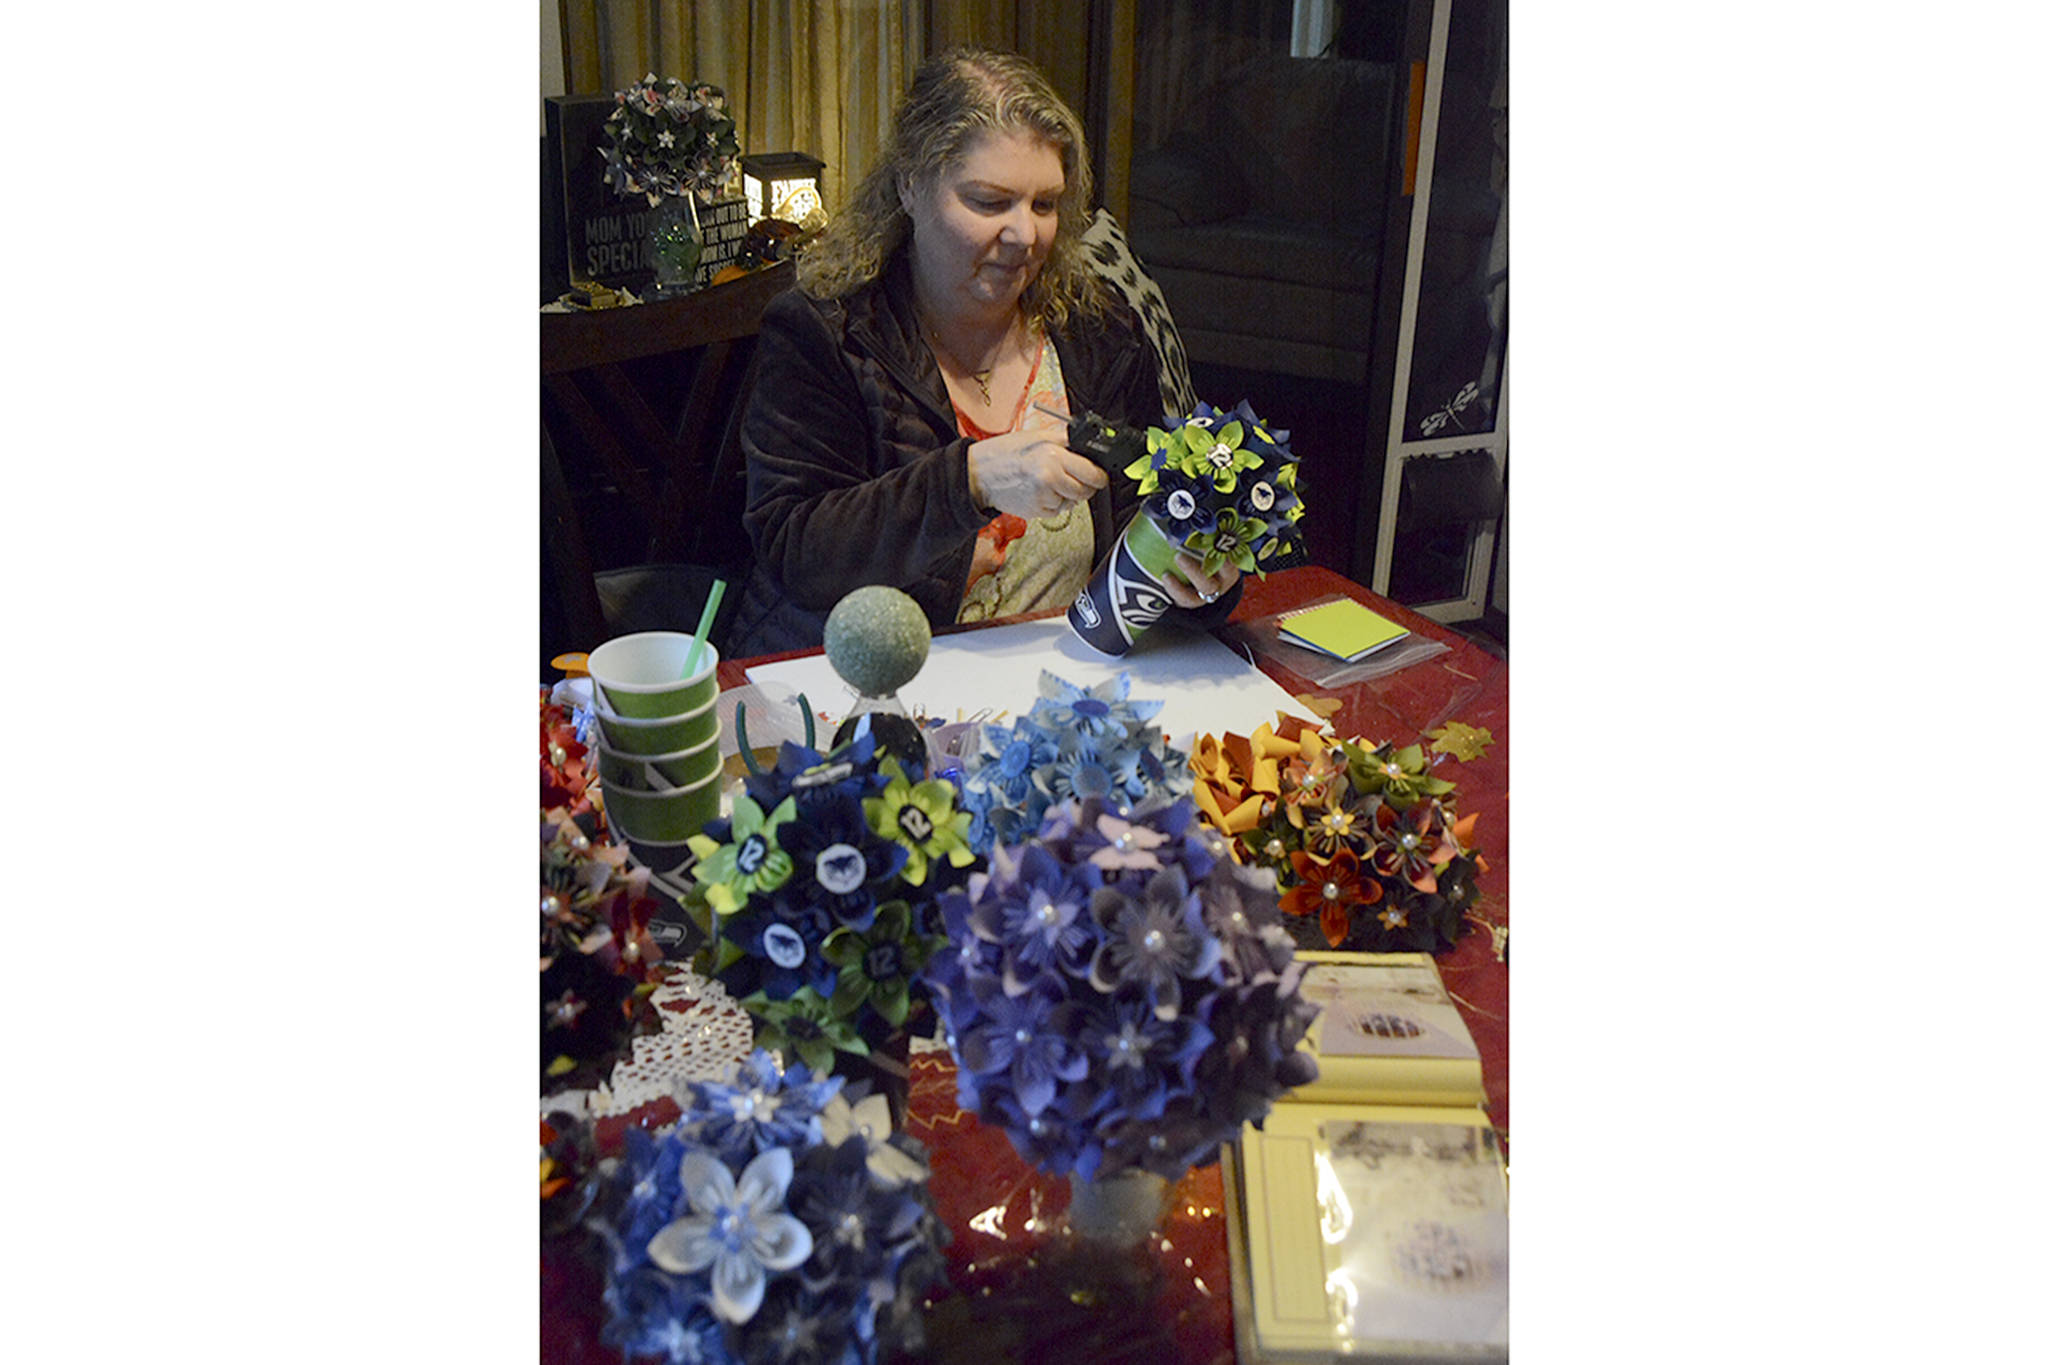 Paper flowers become creative passion for Marysville woman